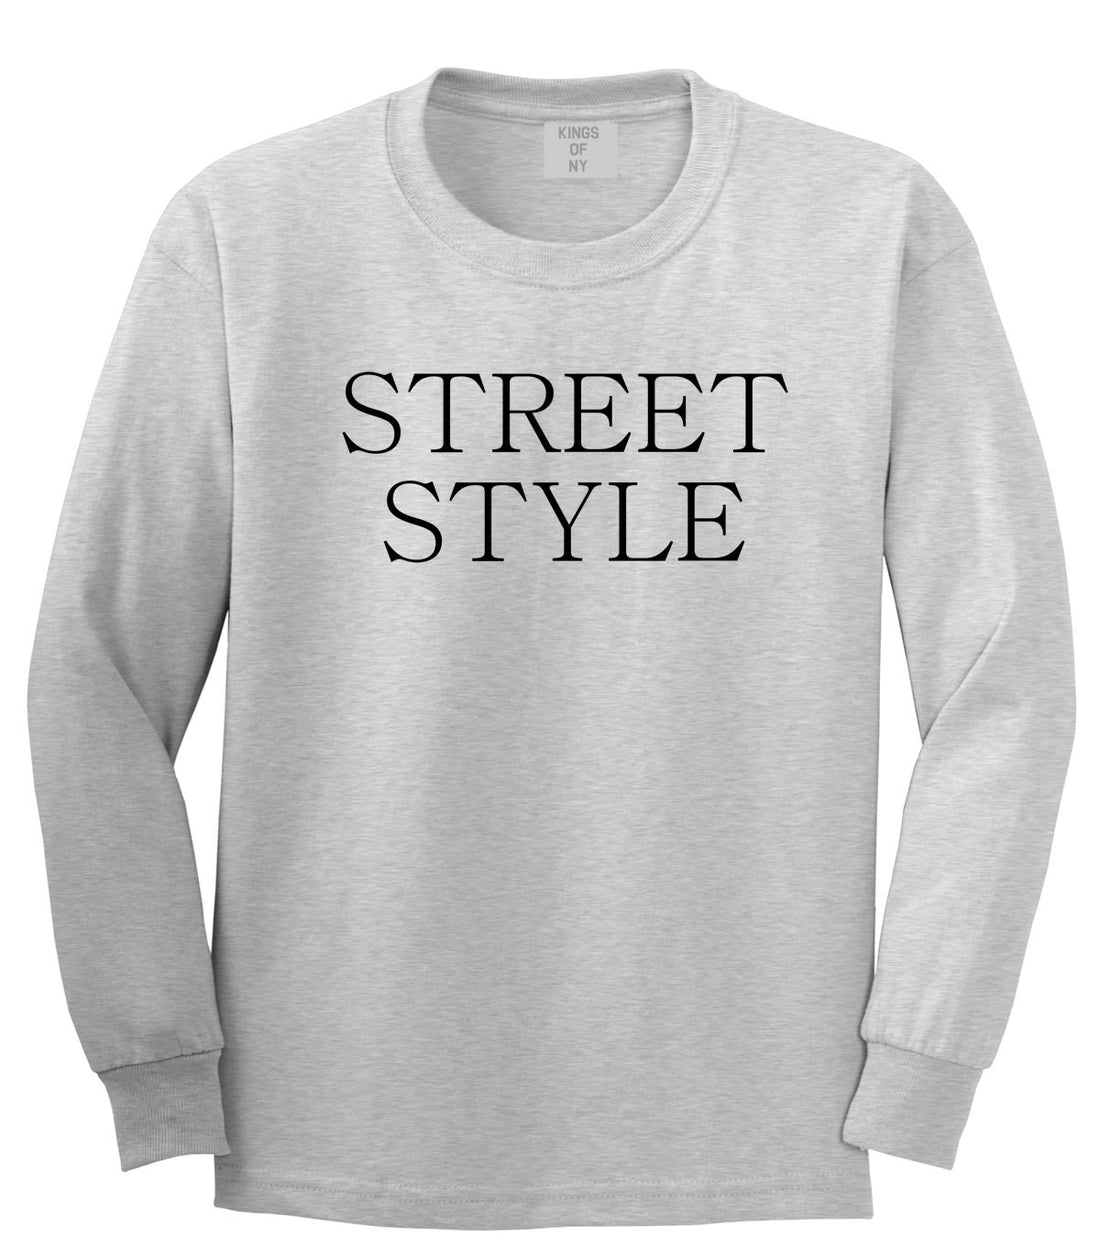 Street Style Photography Long Sleeve T-Shirt in Grey by Kings Of NY